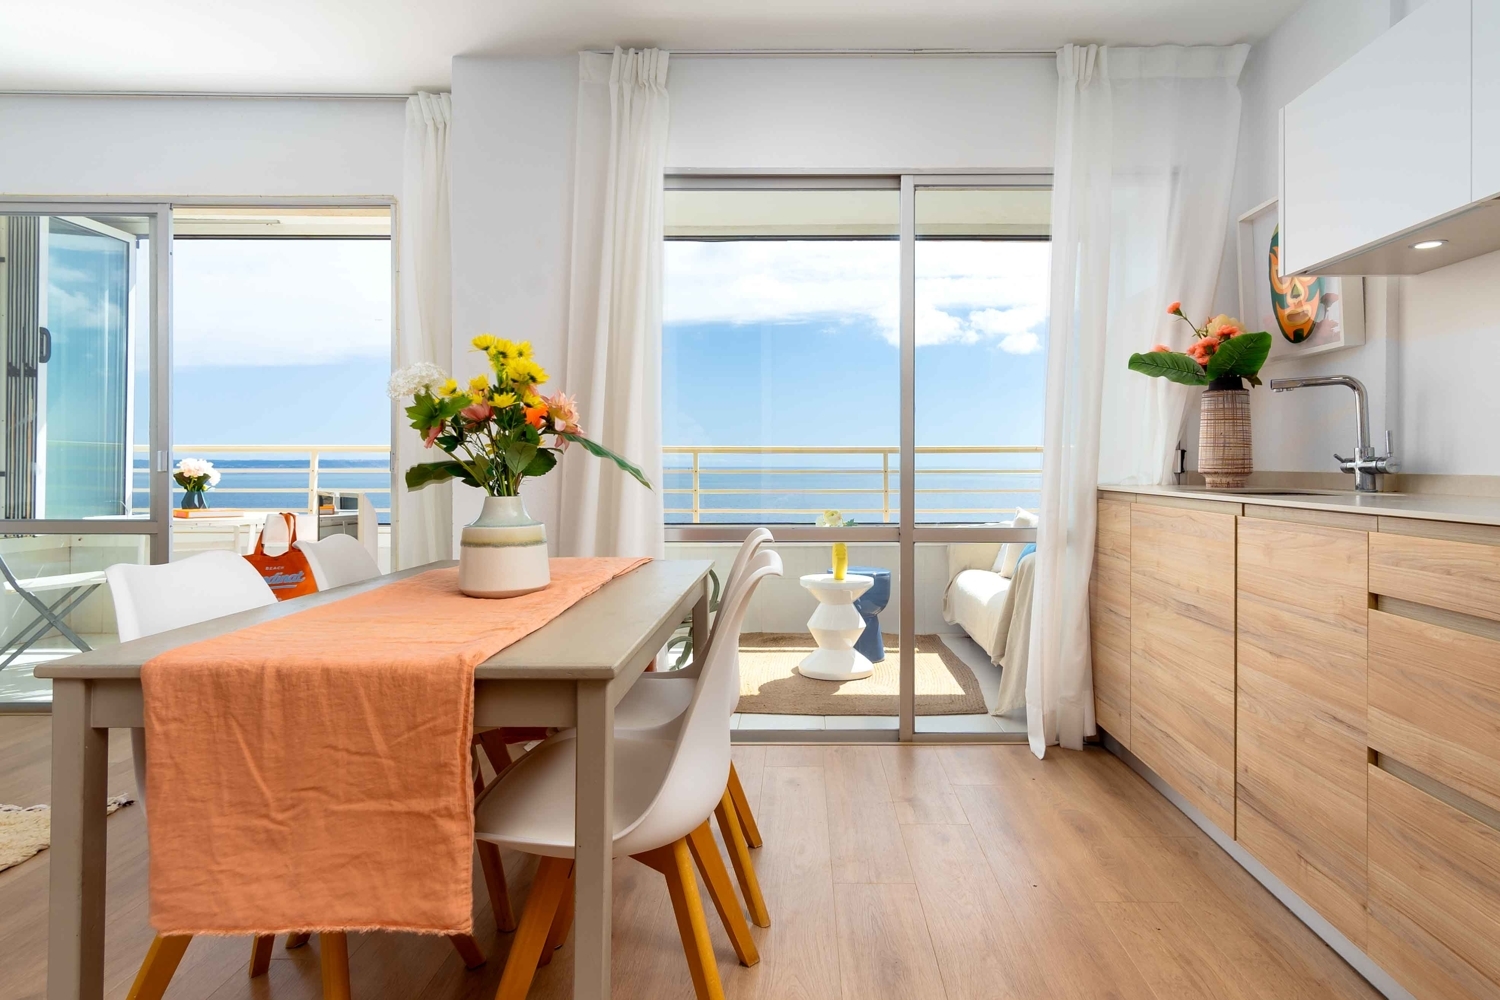 STUNNING SEASIDE APARTMENT WITH SPECTACULAR VIEWS